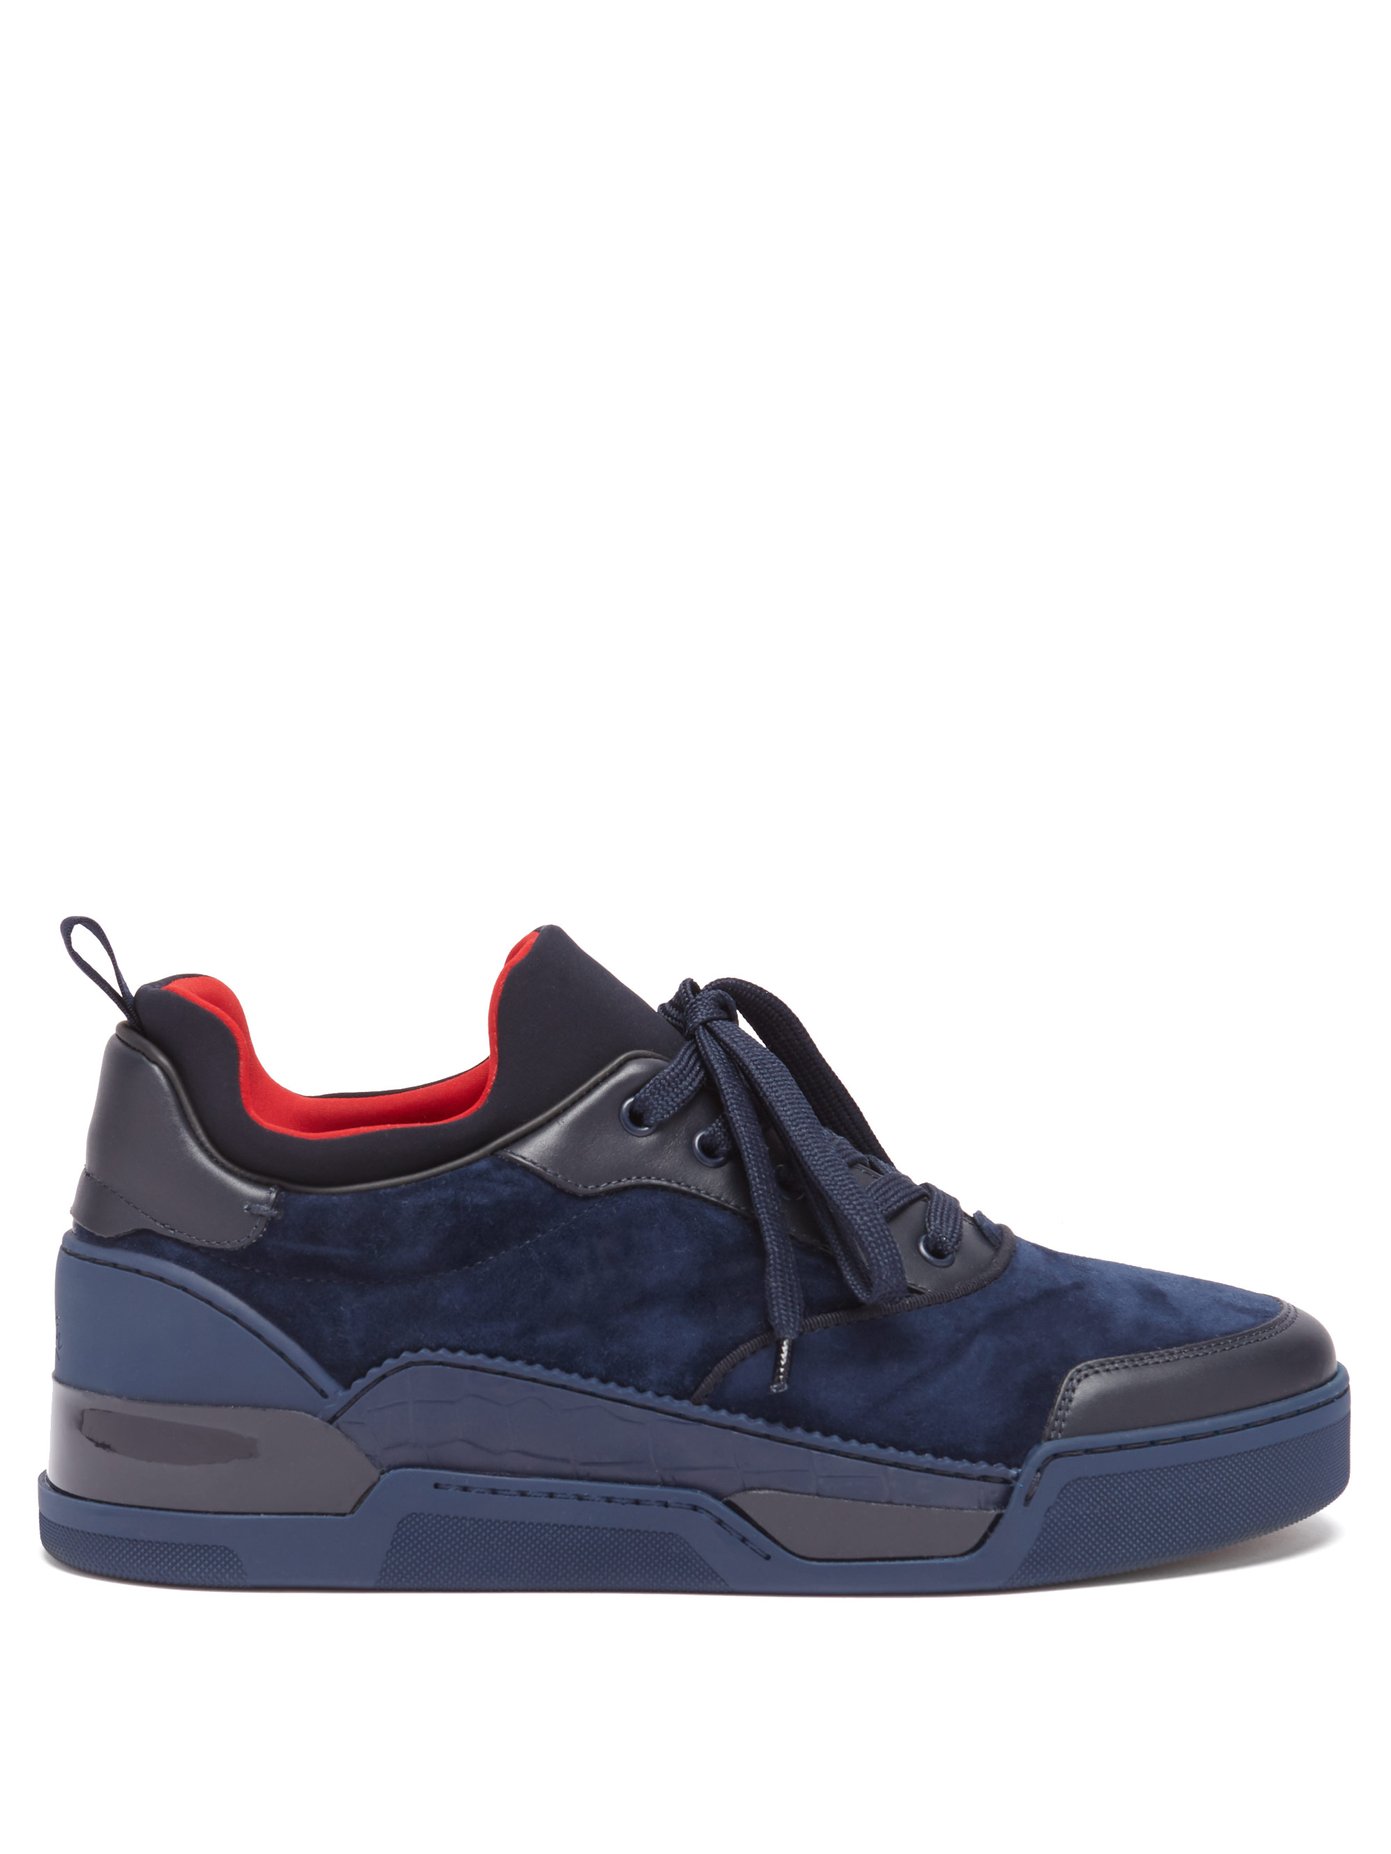 mens blue suede christian louboutin